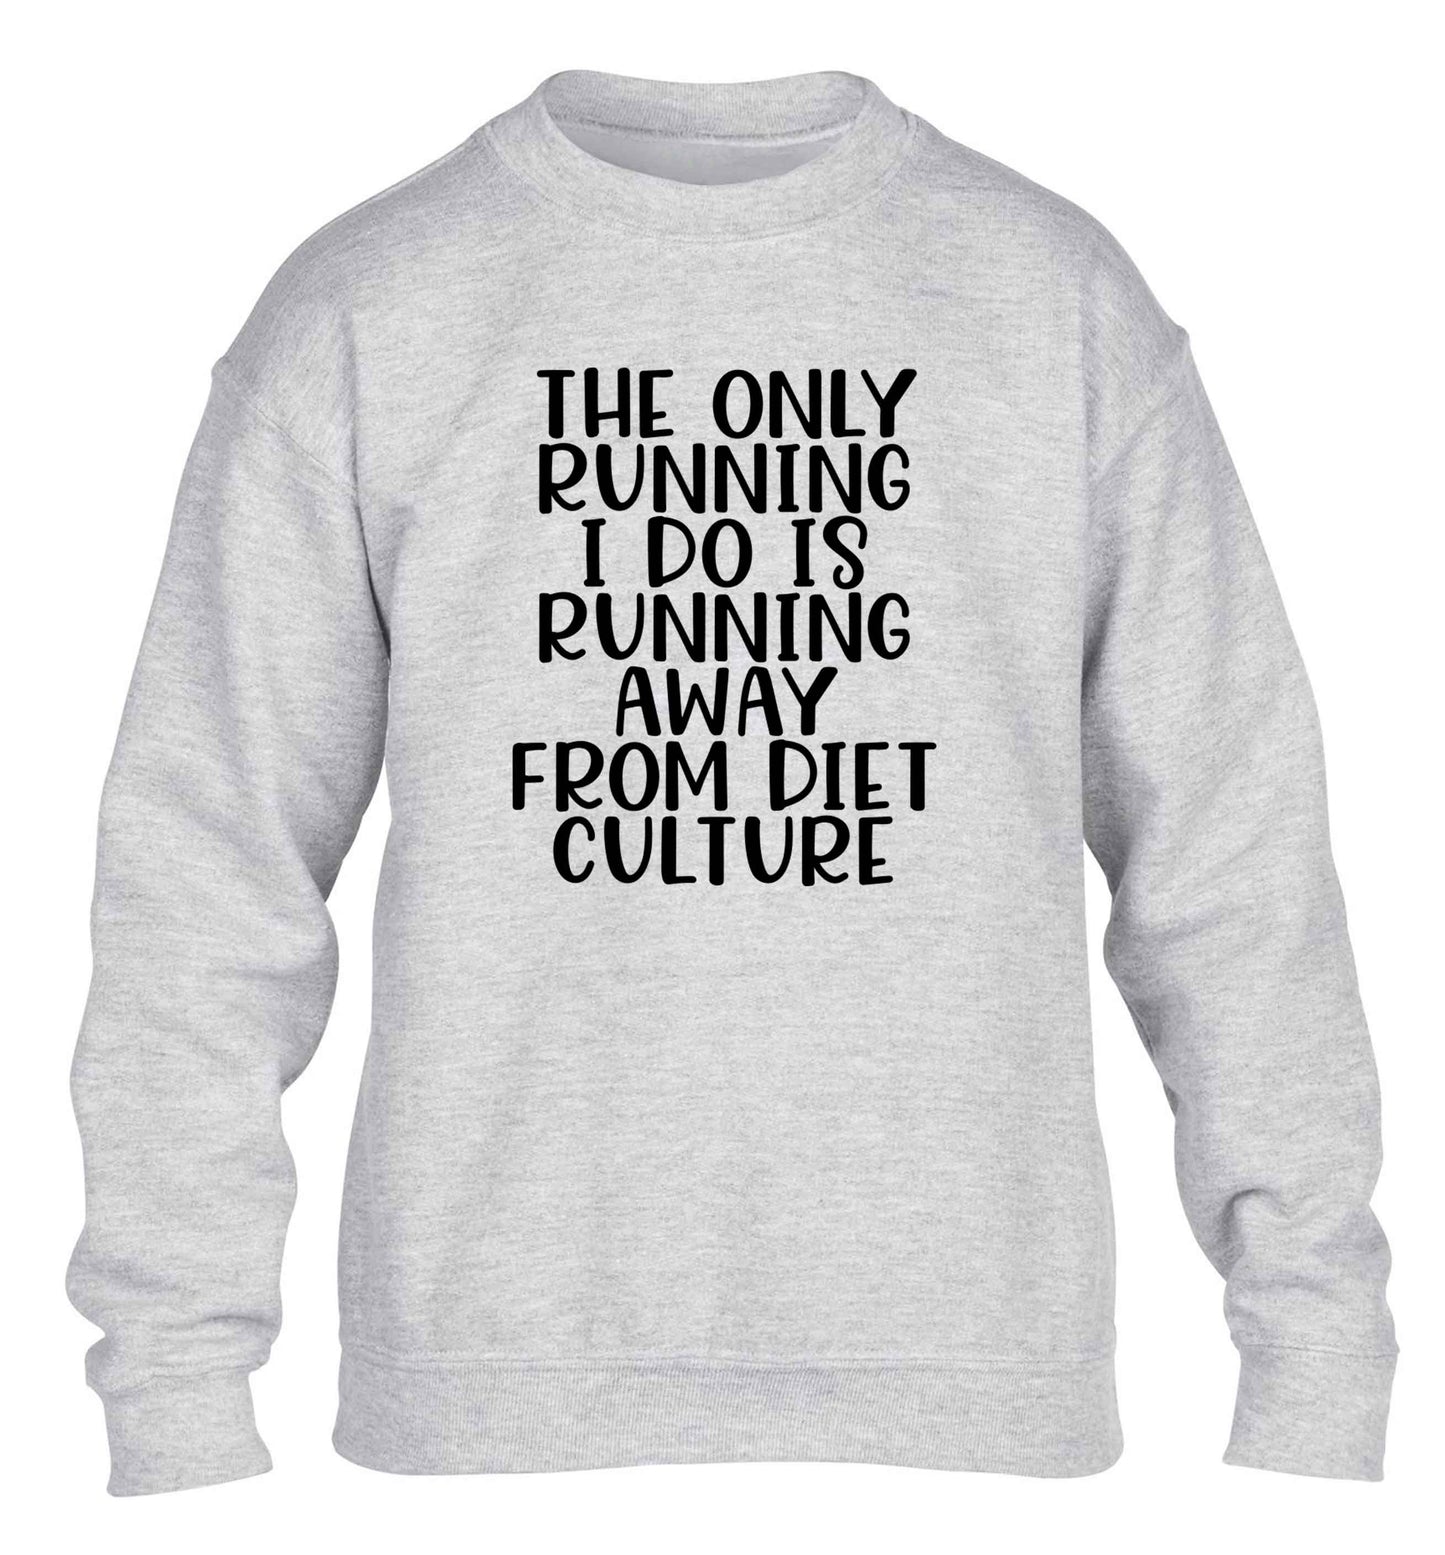 The only running I do is running away from diet culture children's grey sweater 12-13 Years